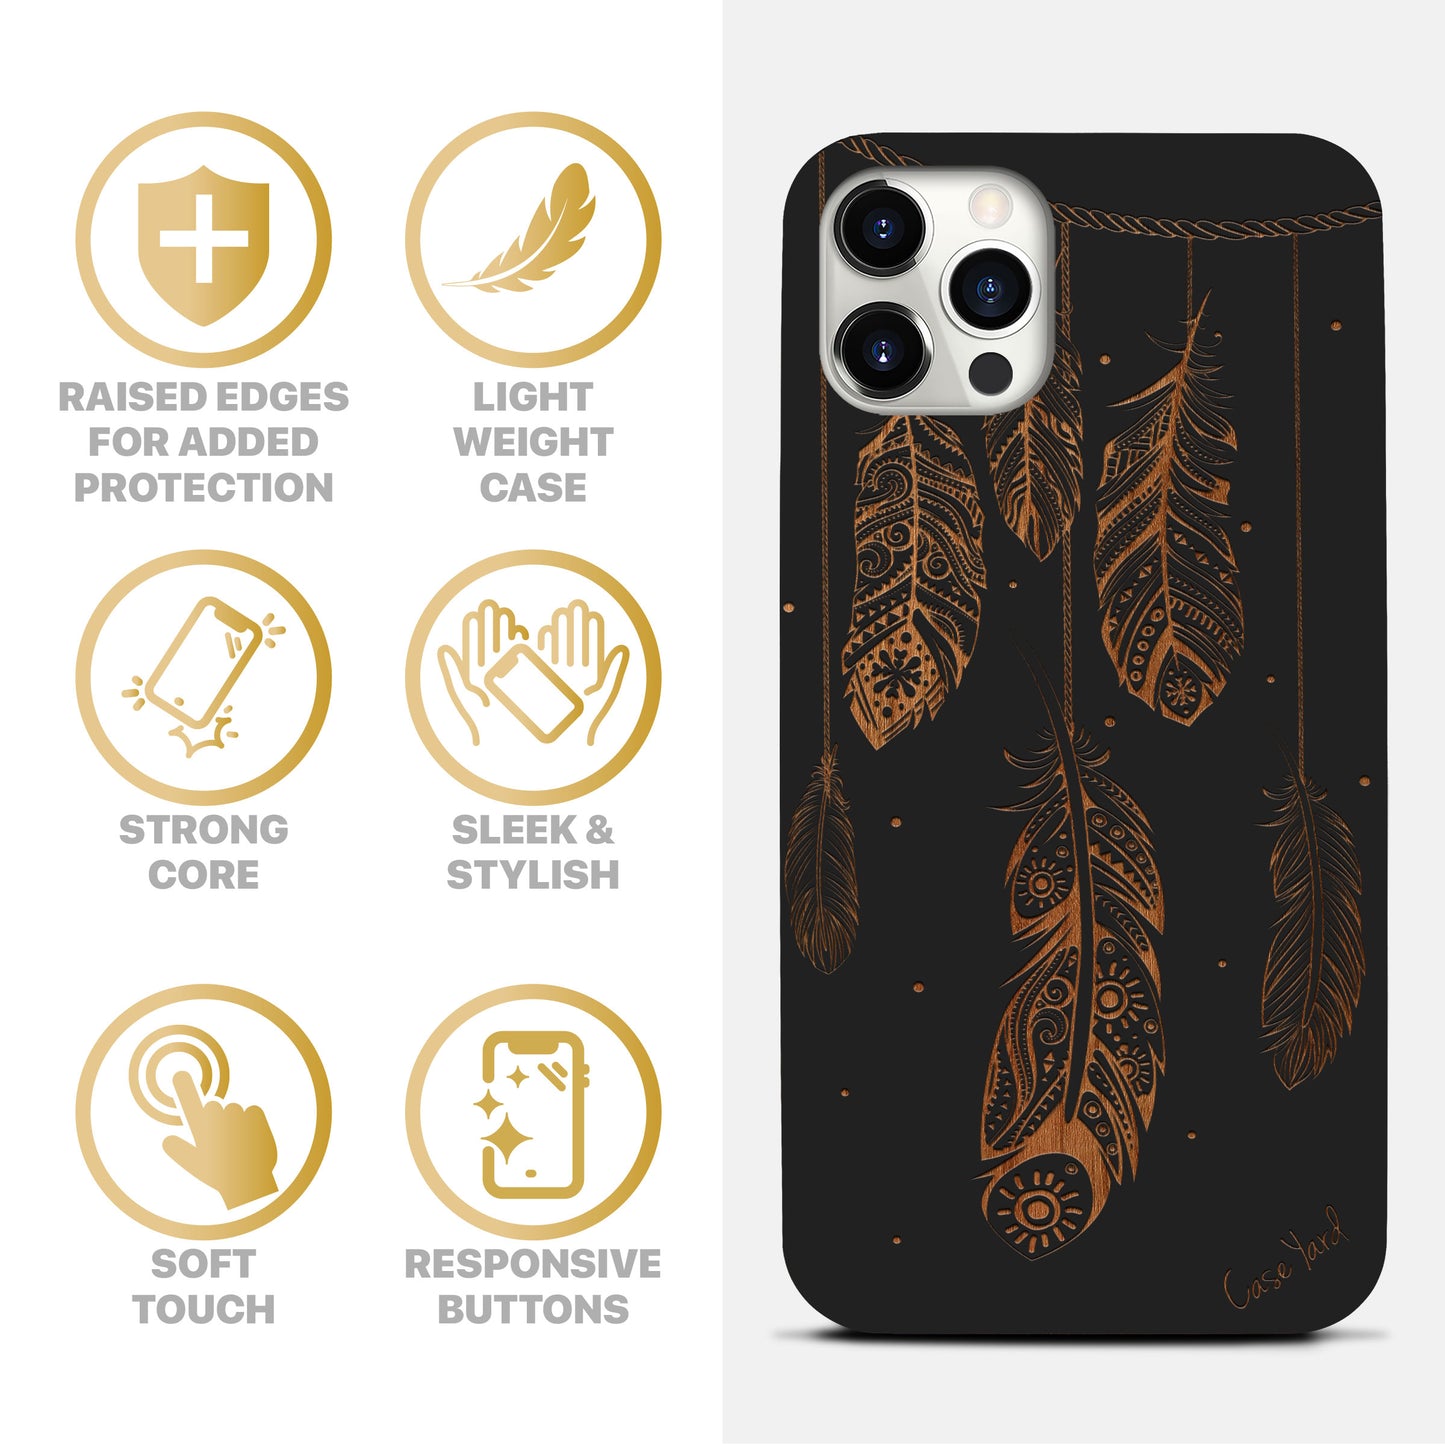 Wooden Cell Phone Case Cover, Laser Engraved case for iPhone & Samsung phone Feathers Design